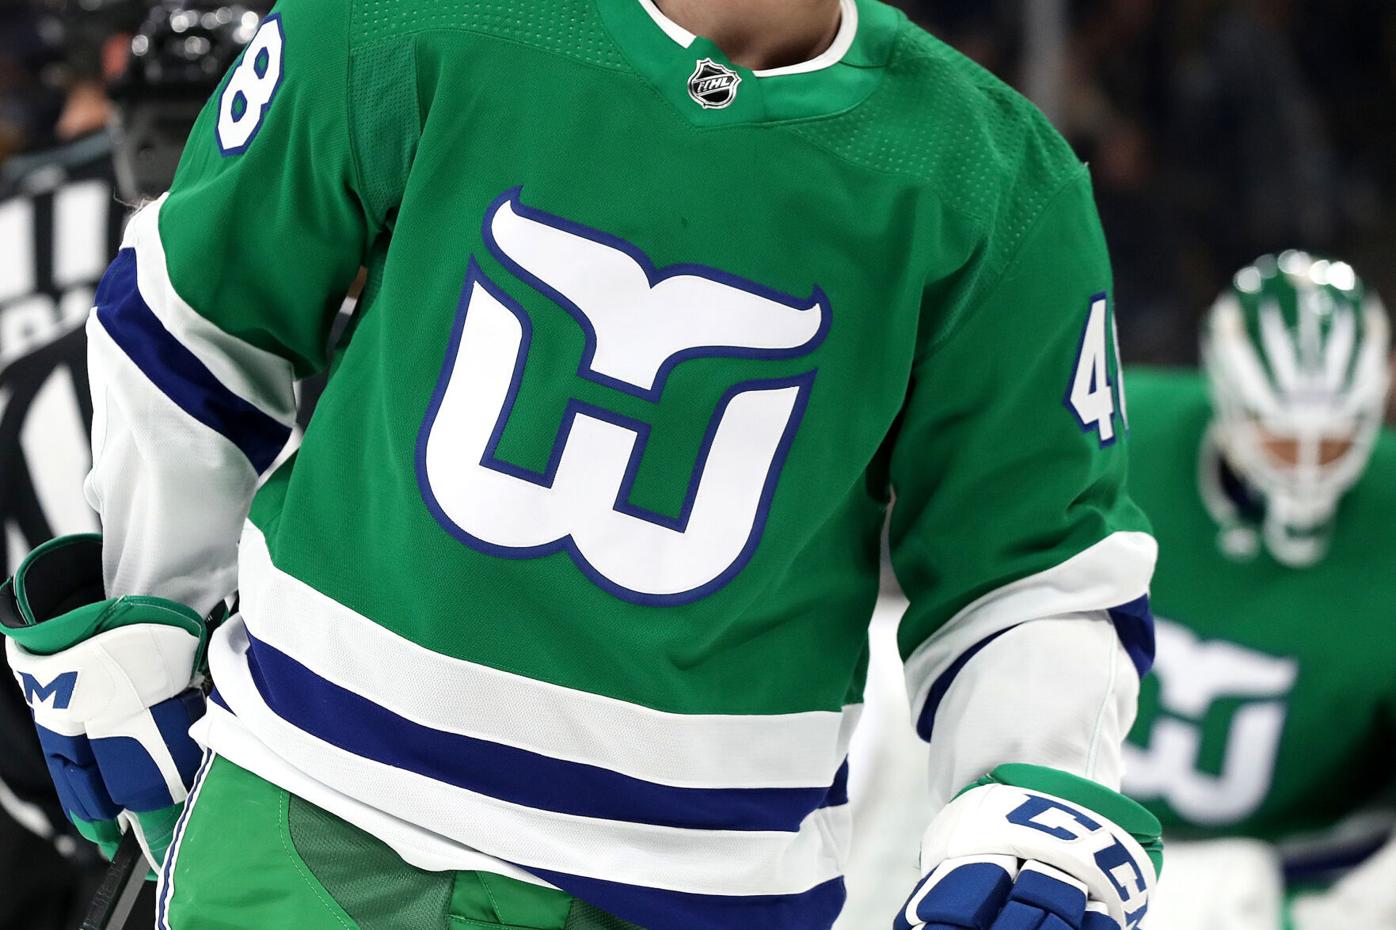 Dom Amore: The Whalers left Hartford, but the hope of bringing them back  never goes away